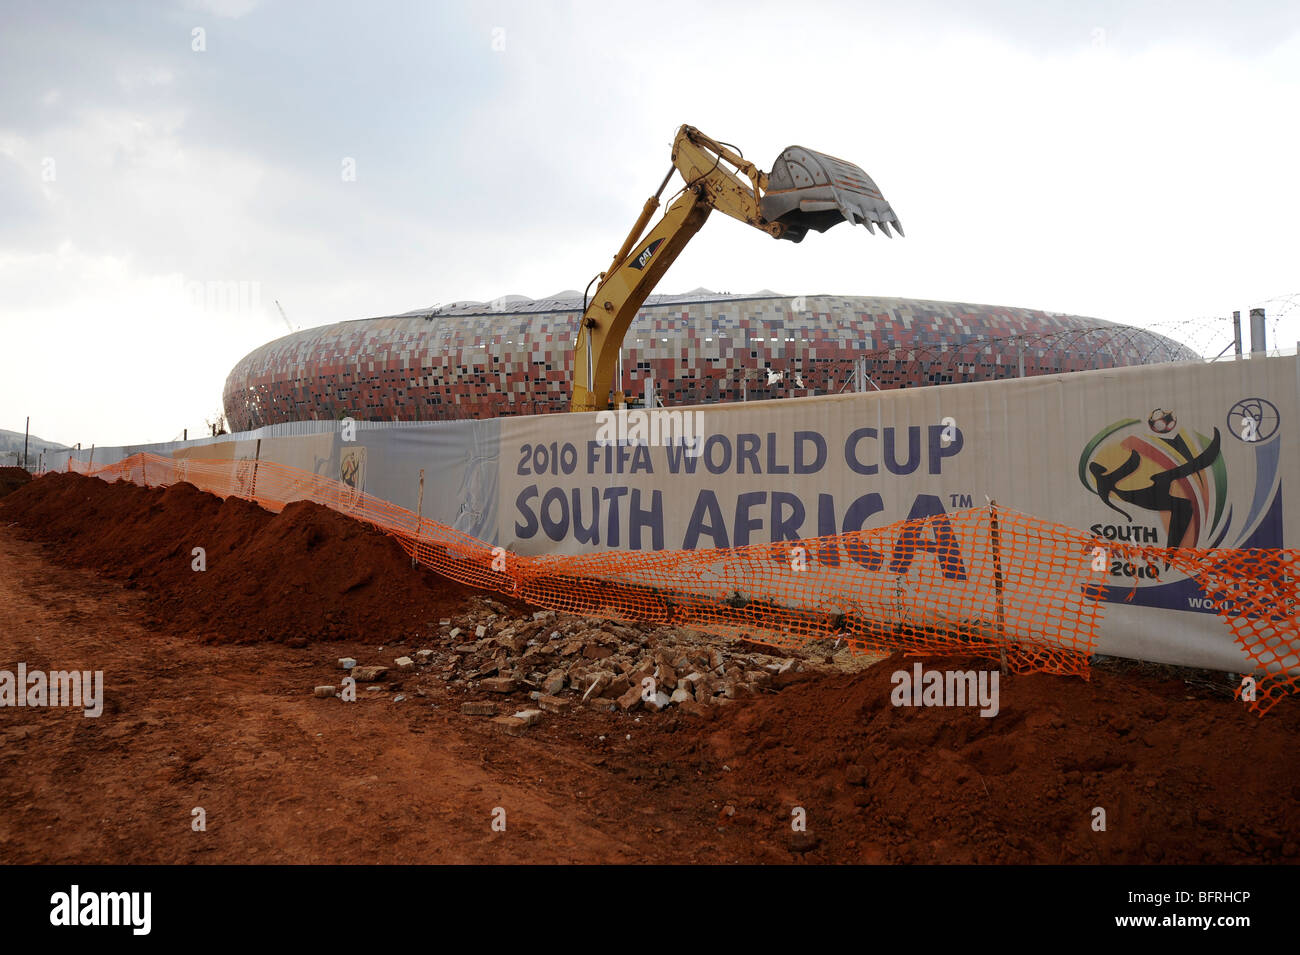 Construction of Soccer City Stadium in South Africa - venue for 2010 FIFA World Cup in Johannesburg, South Africa Stock Photo